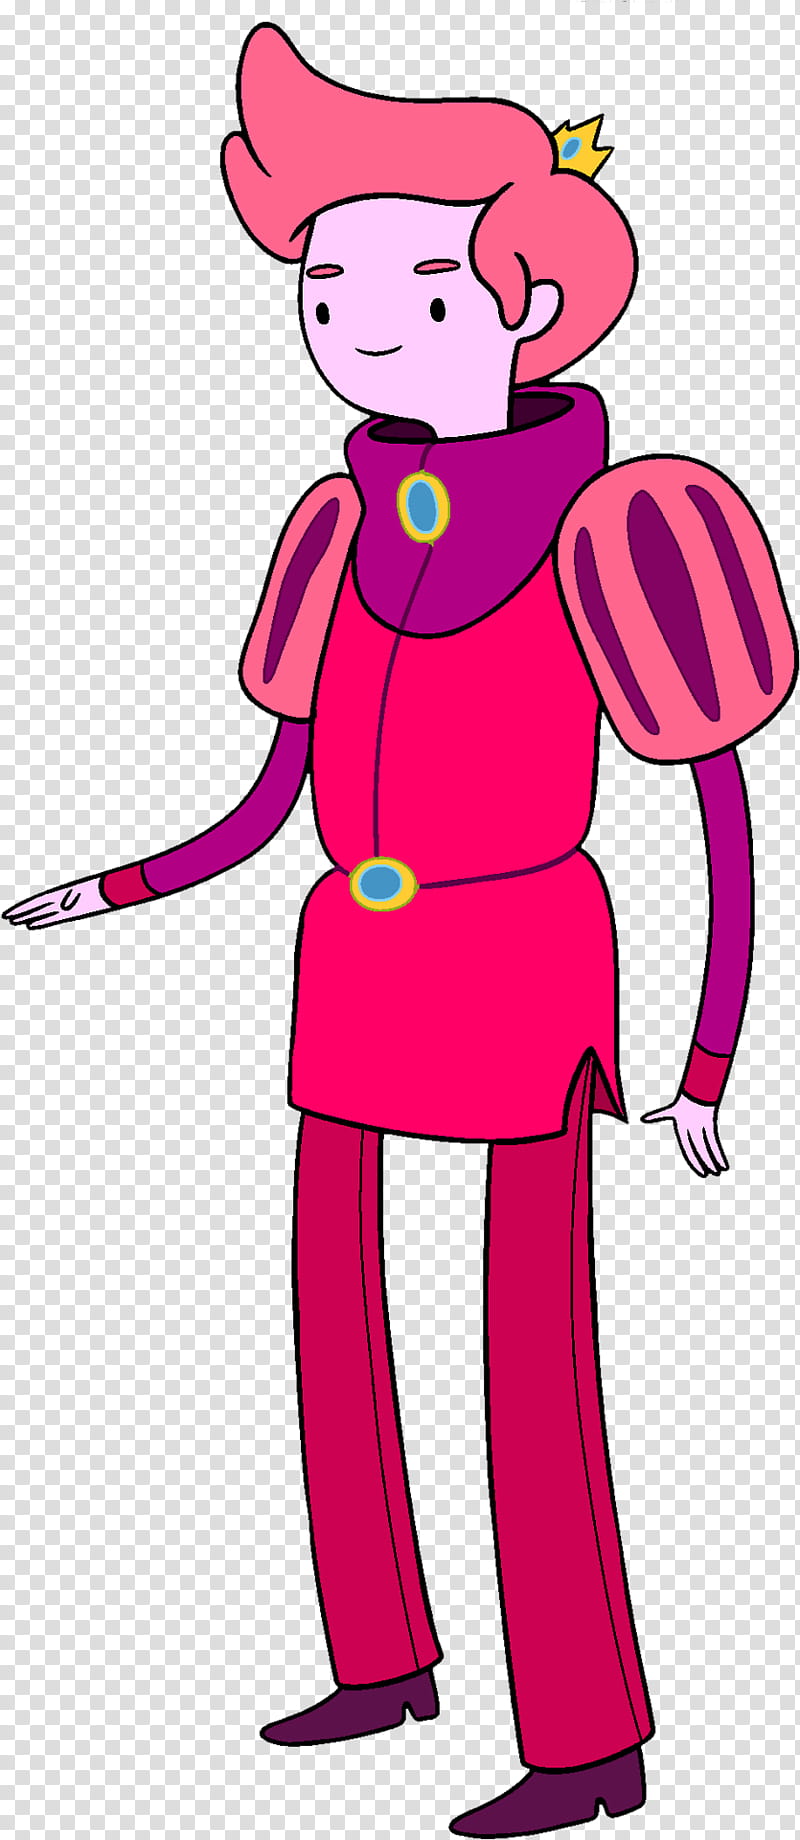 Cartoons, Prince Bubblegum from Adventure Time transparent background PNG clipart